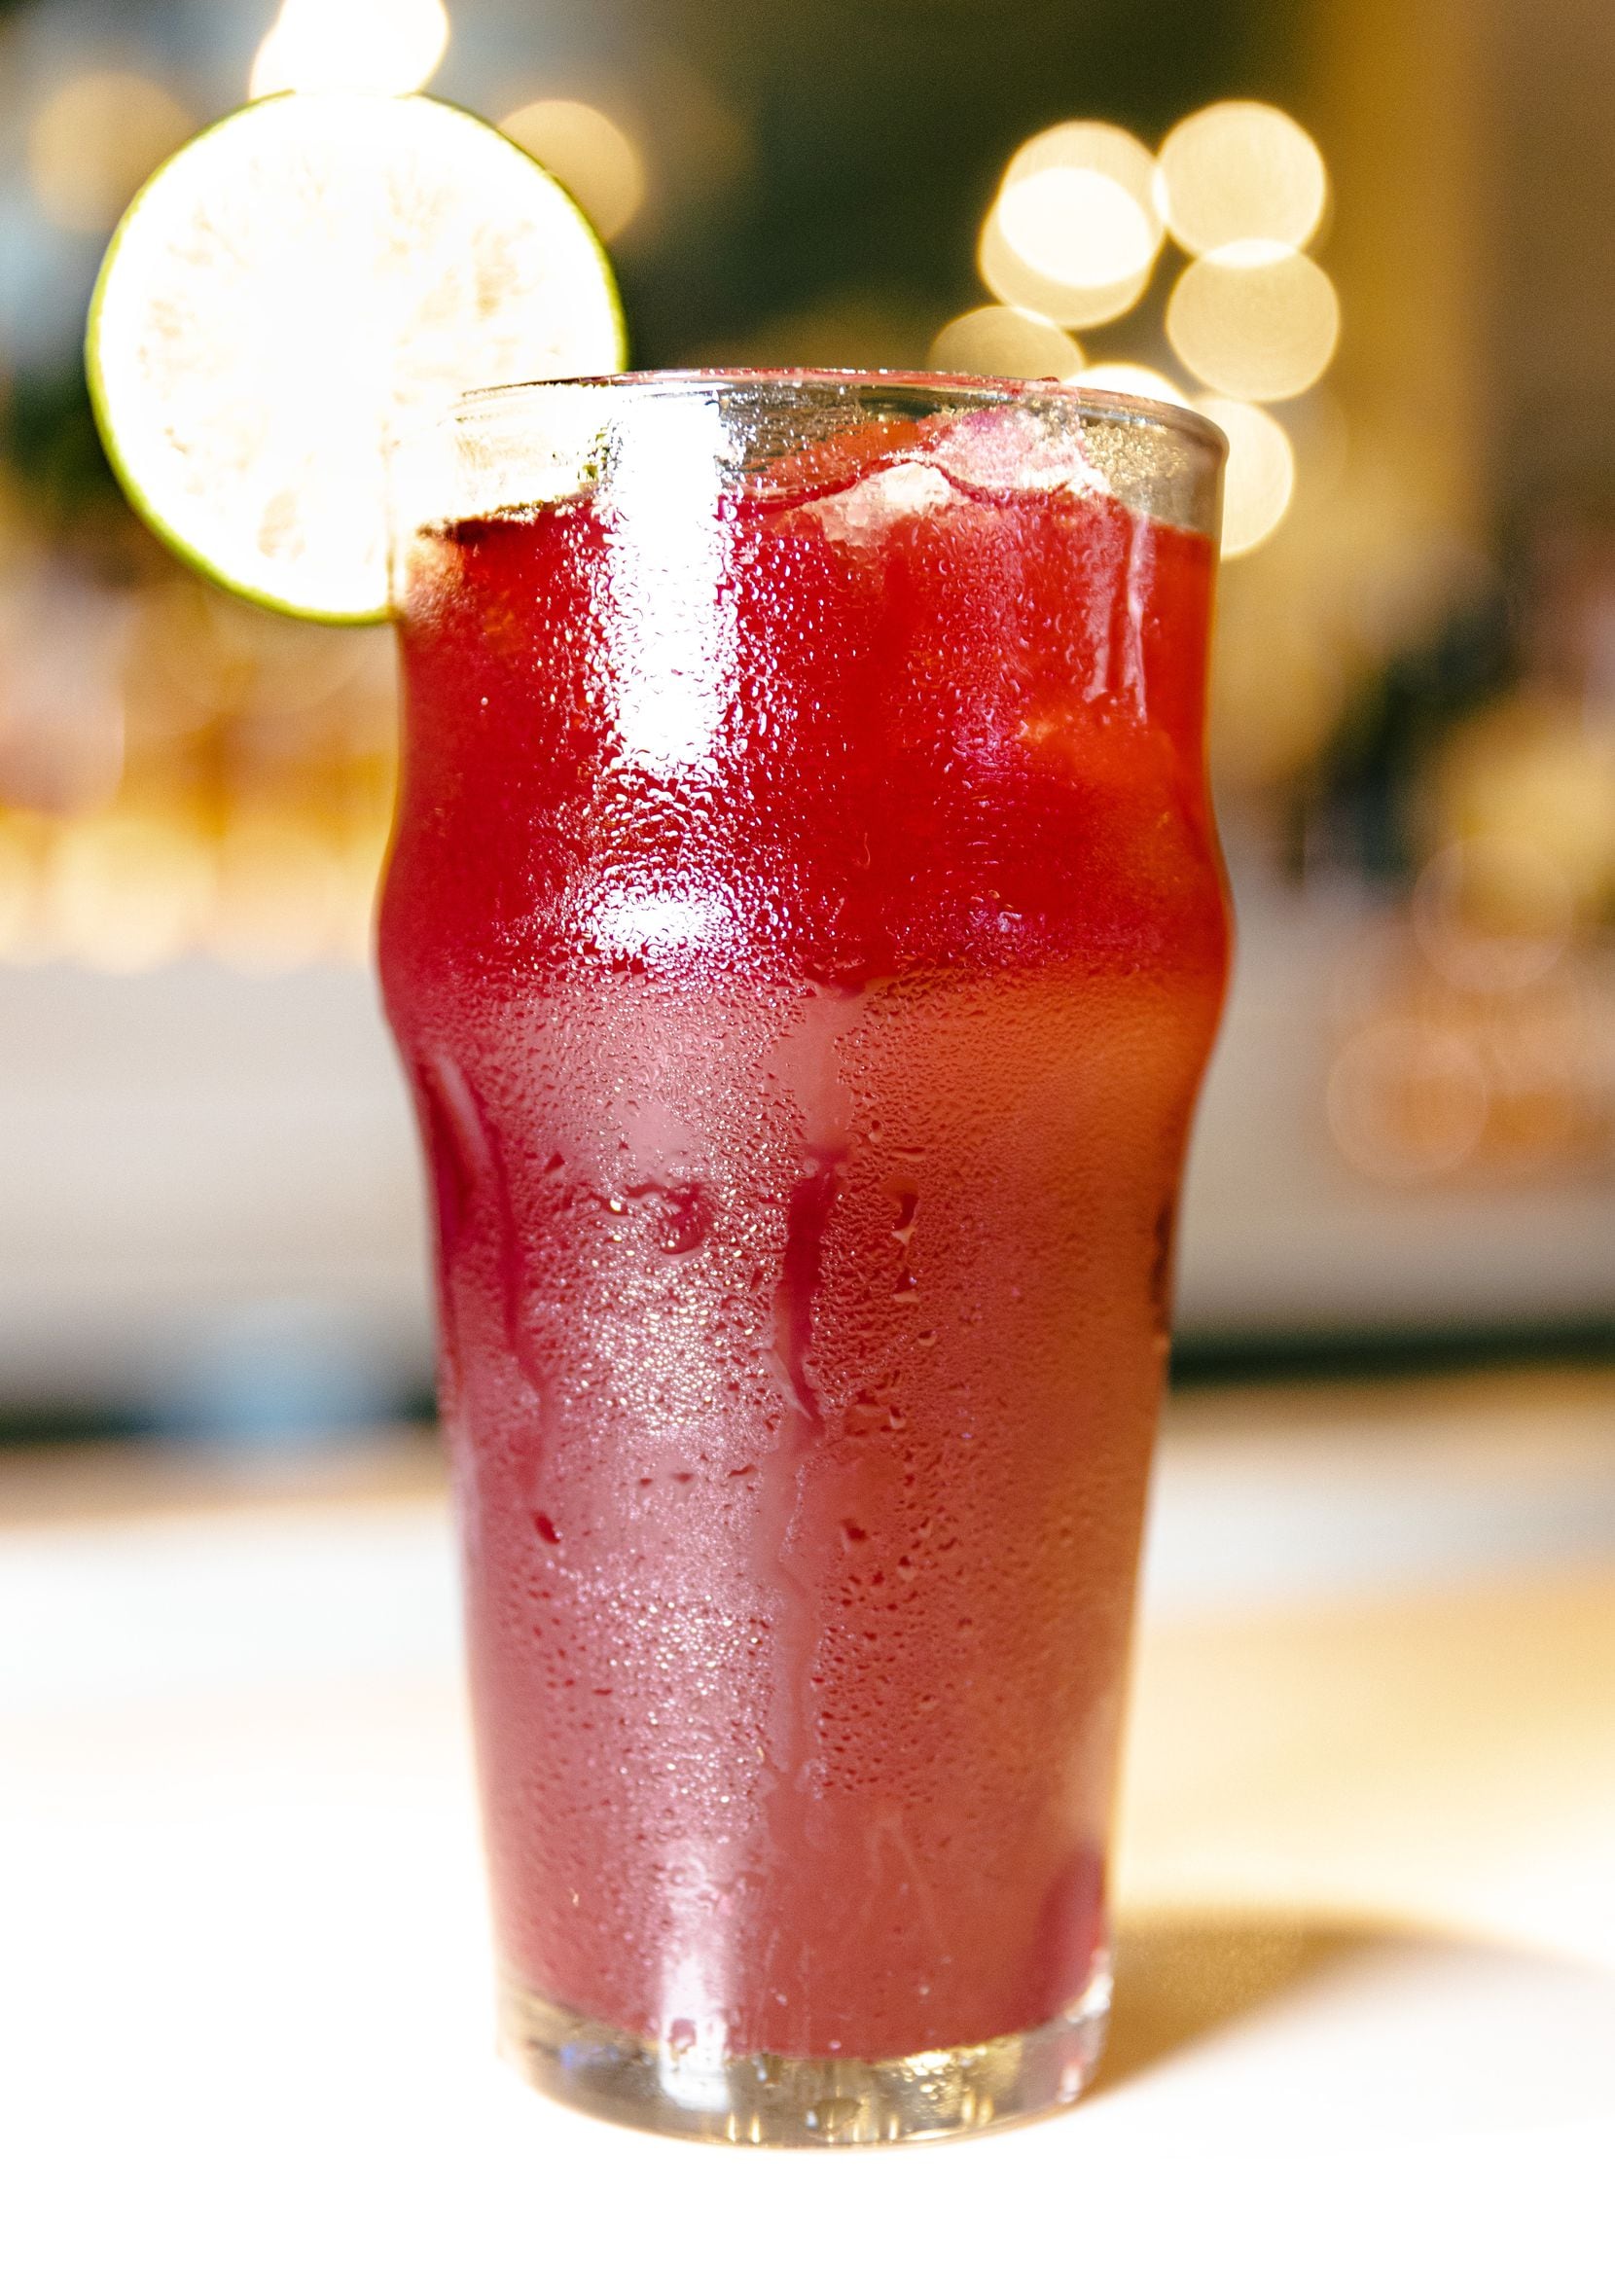 Urban Seafood Co. offers the Pomaginger Fizz non-alcoholic drink.